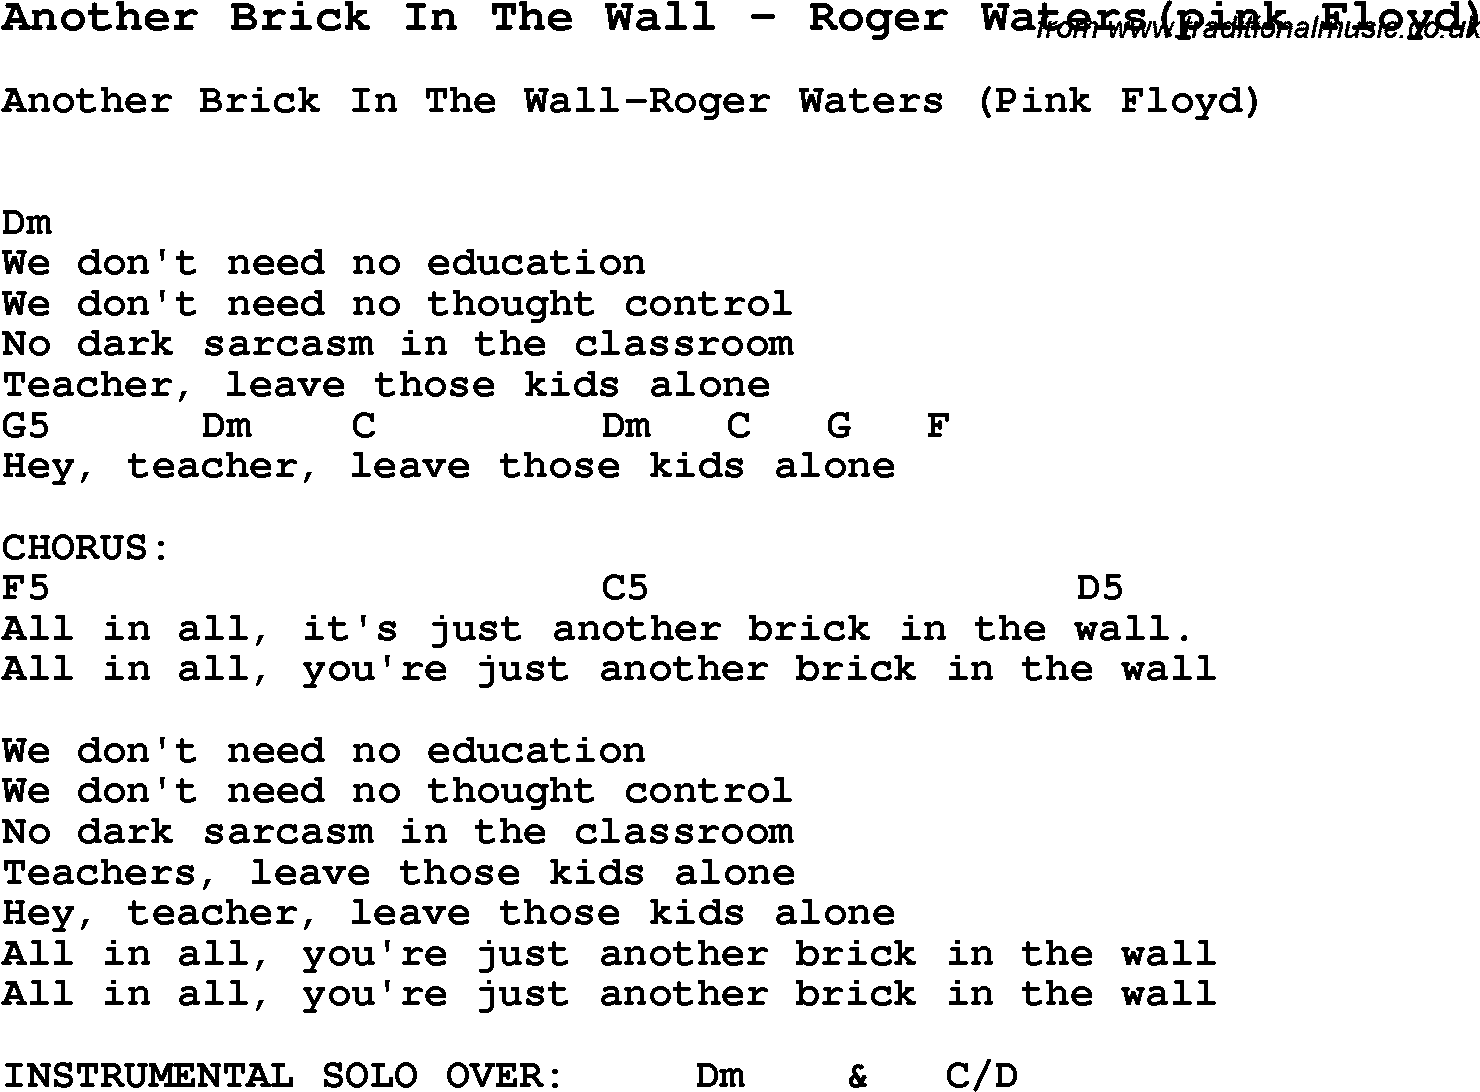 Song Another Brick In The Wall by Roger Waters(pink Floyd), with lyrics for vocal performance and accompaniment chords for Ukulele, Guitar Banjo etc.